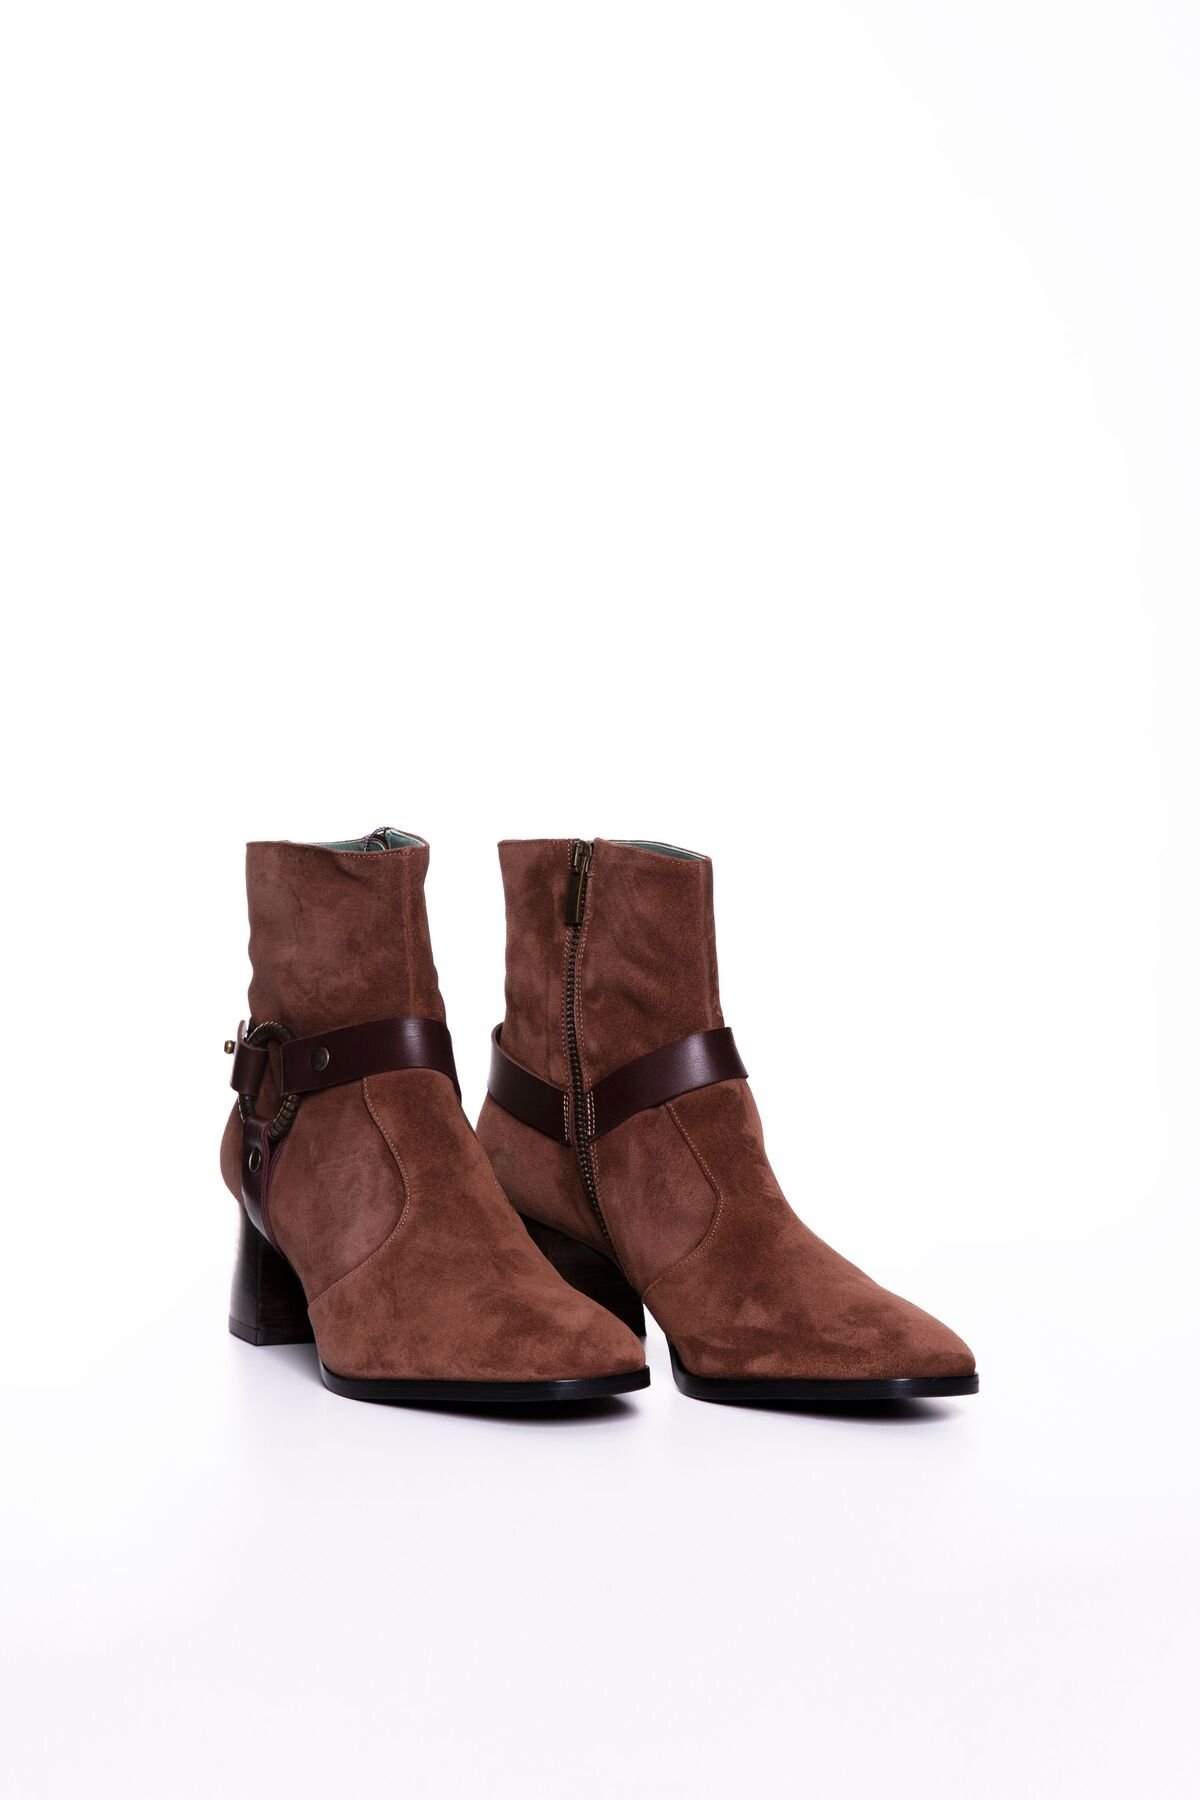 Buckle Detailed Brown Heeled Boots